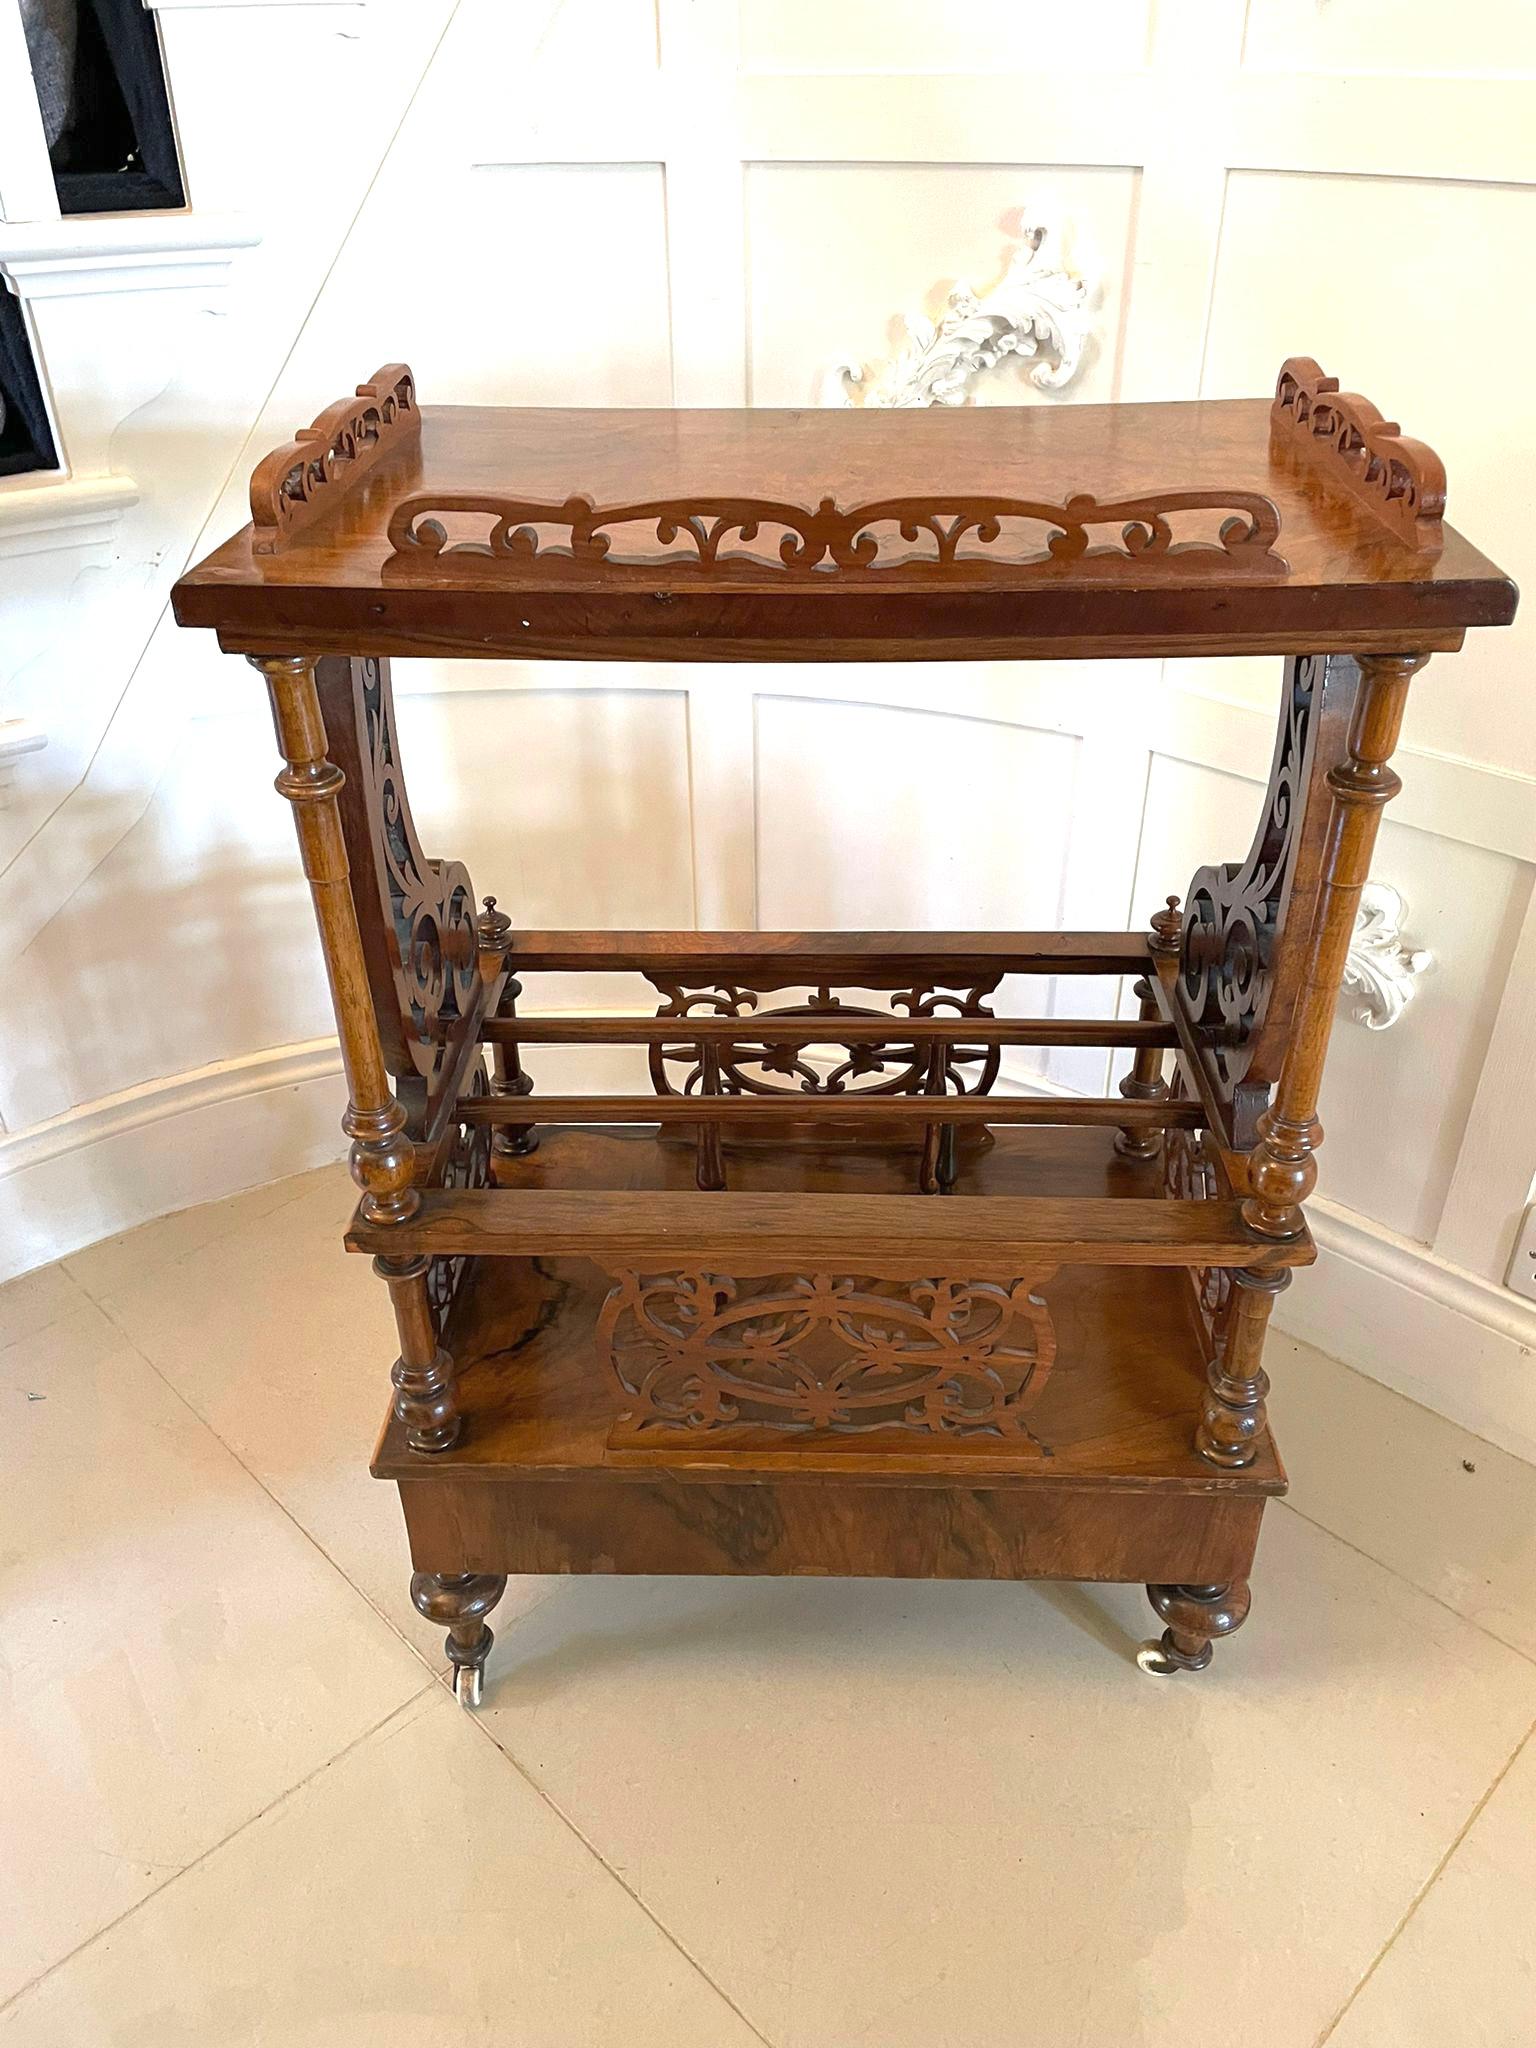 Antique Victorian quality burr walnut Canterbury with galleried superstructure supported by beautiful fret-carved scrolling supports issuing from a Canterbury base with fret-carved side panels and dividers, the base fitted with a drawer and original